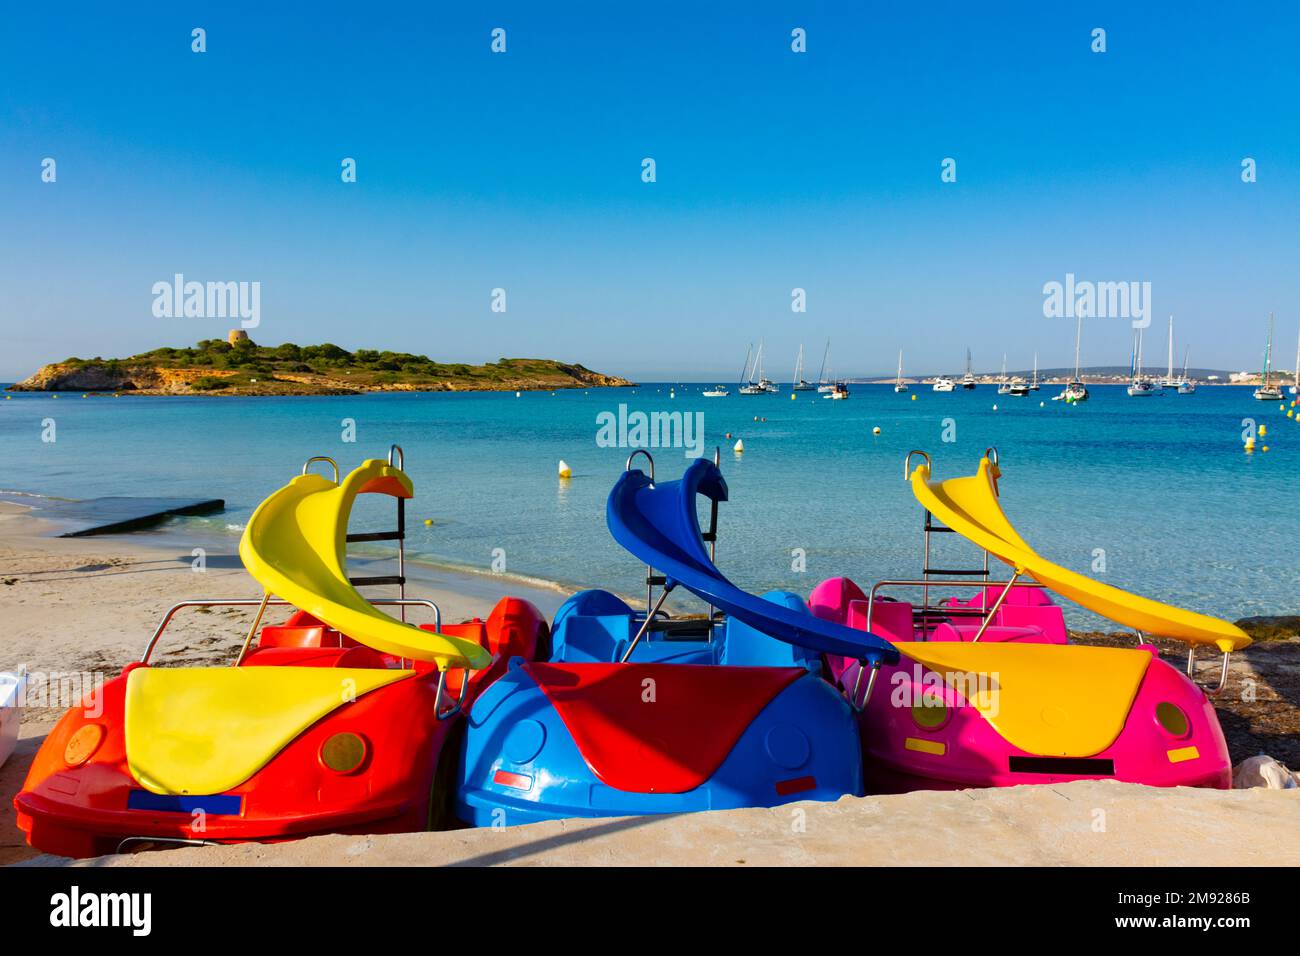 Some pedal boats on the sand in the Xinxell cove, in Ses Illetes, Majorca, Spain. Moored boats an Palmanova at background Stock Photo